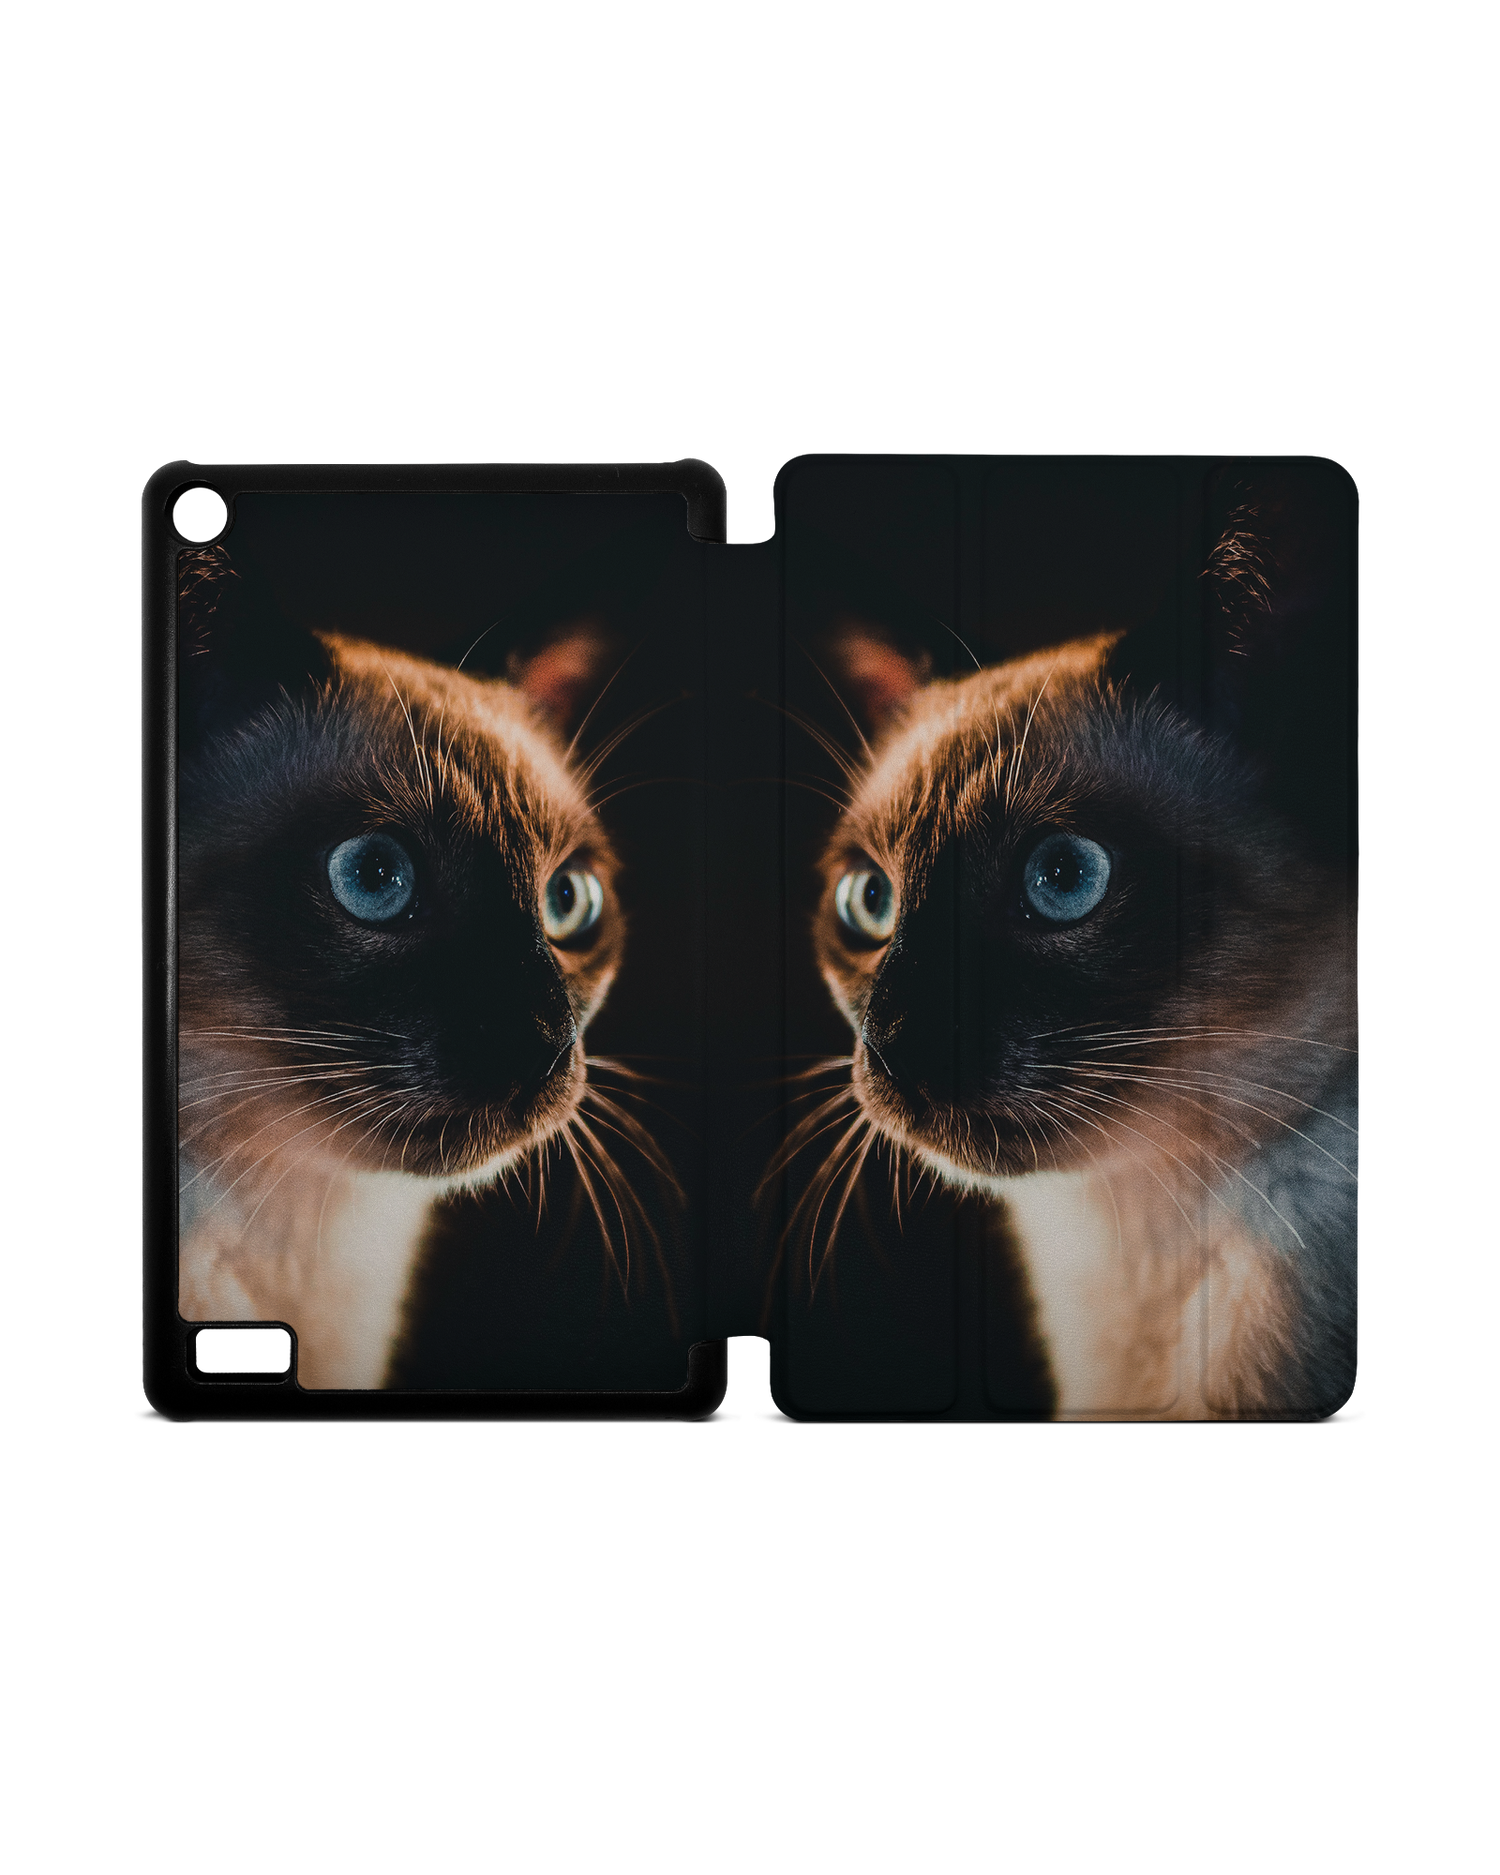 Siamese Cat Tablet Smart Case for Amazon Fire 7: Opened